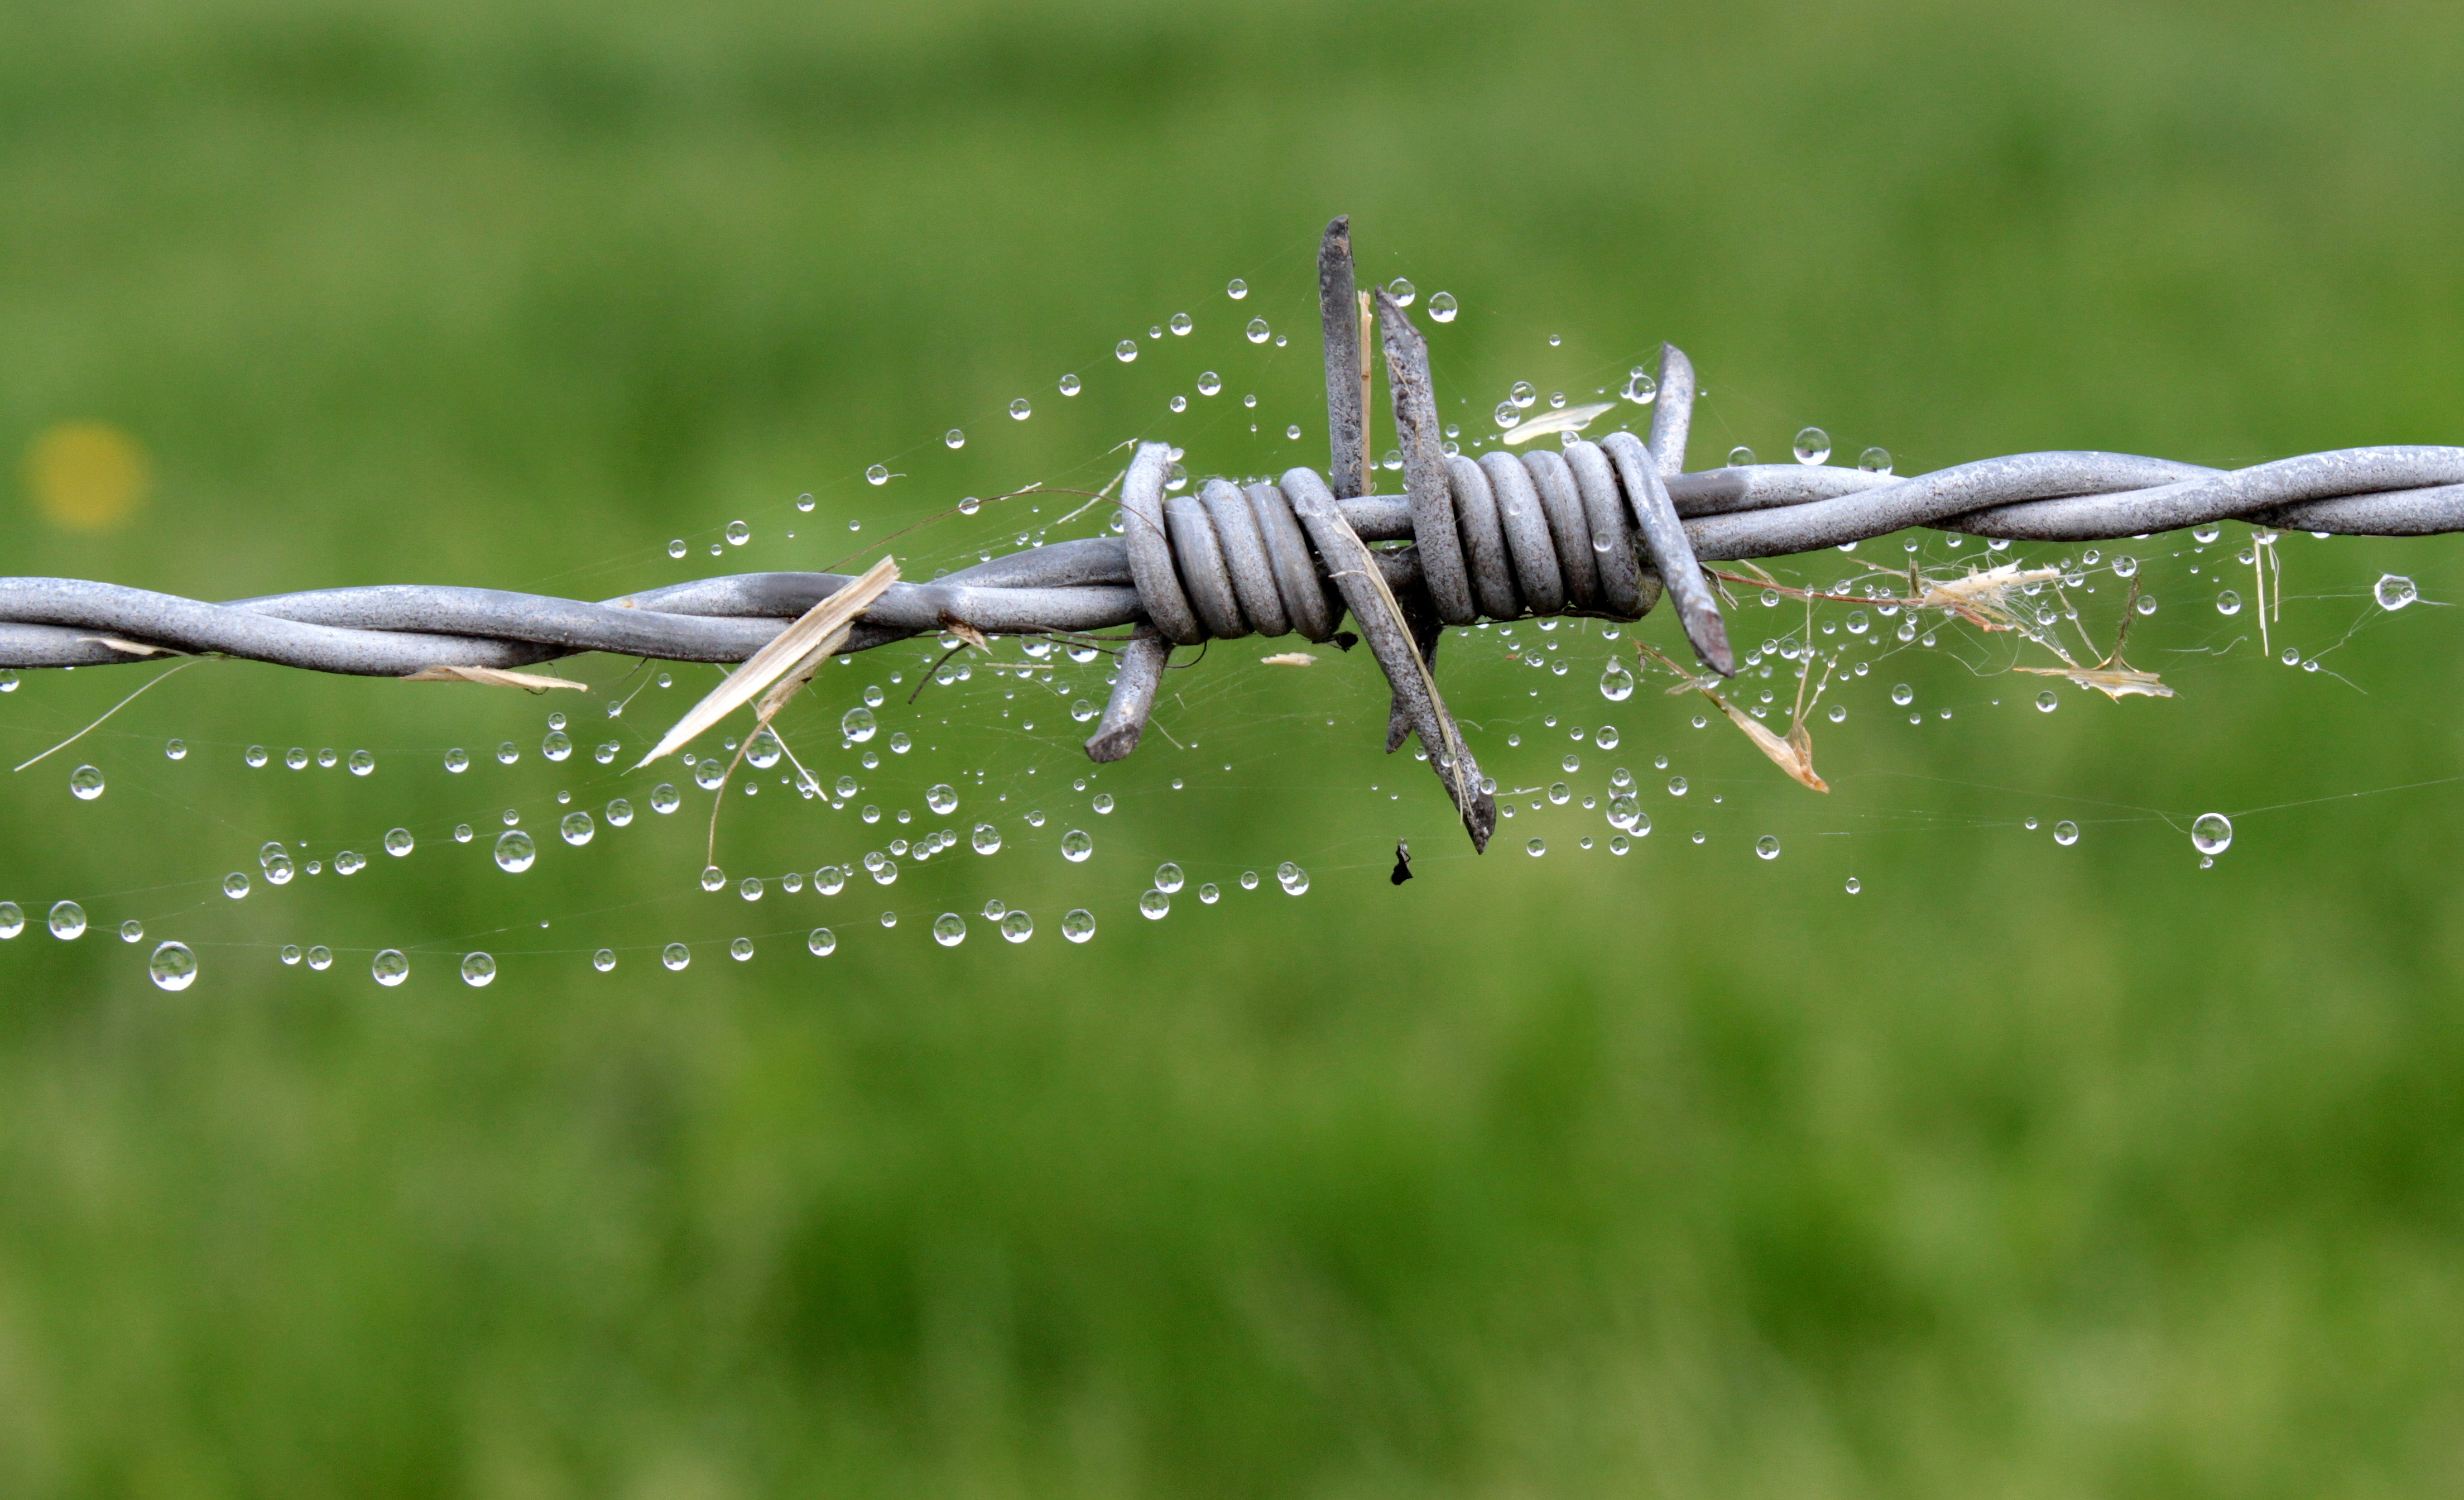 man made, barb wire, macro, spider web, water drop